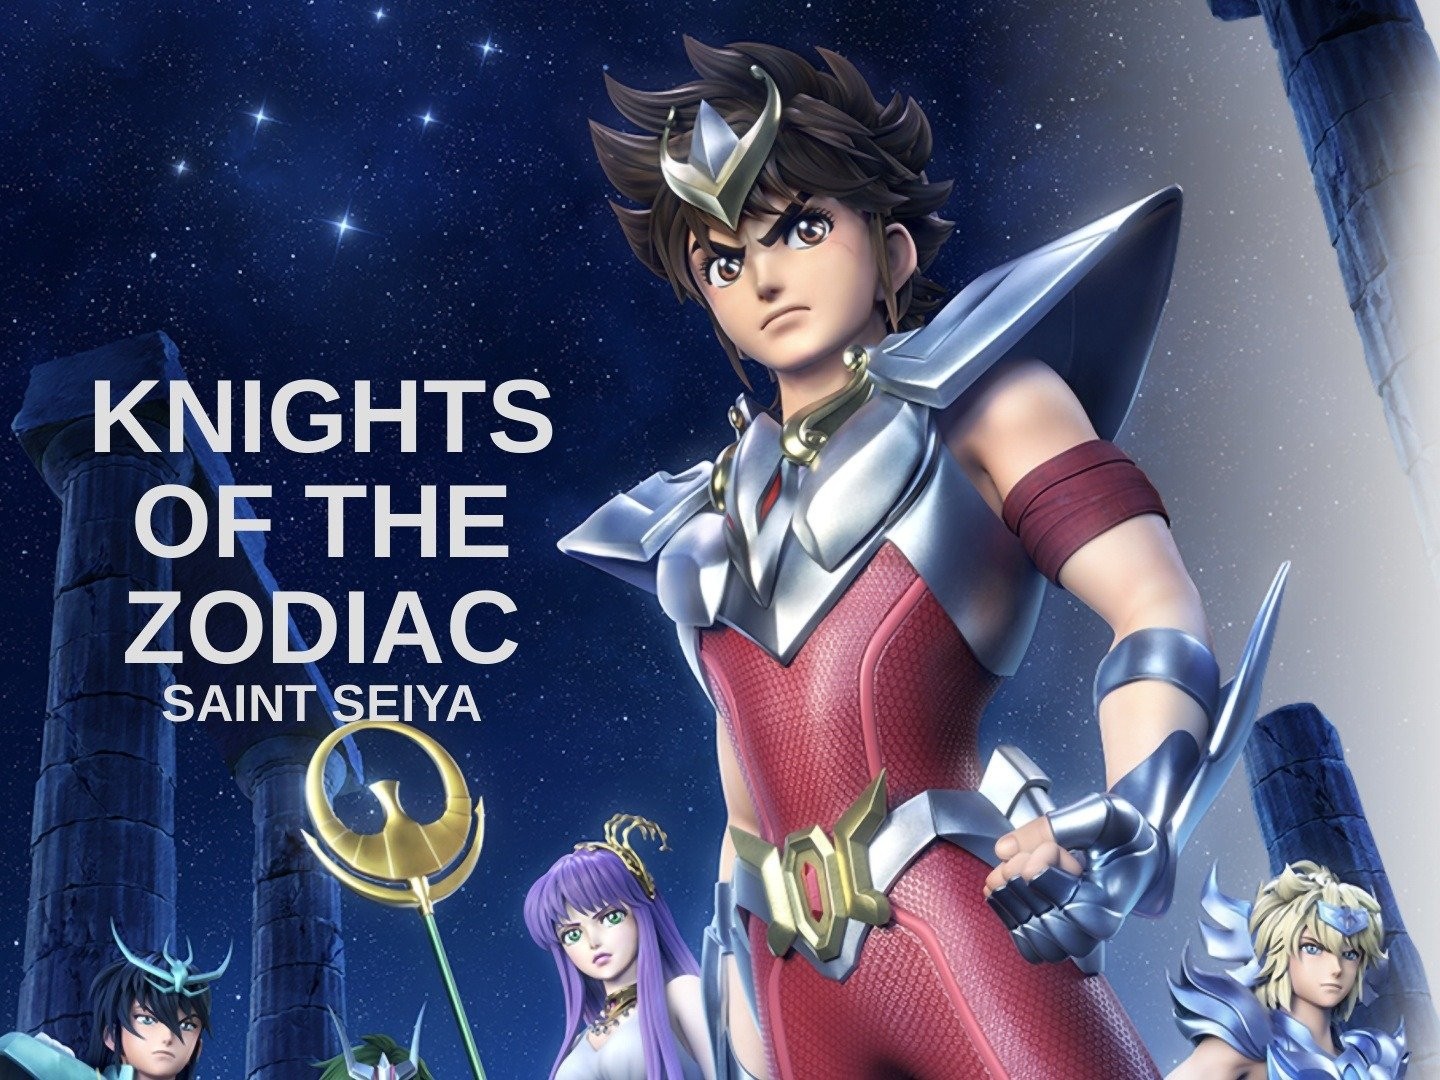 Knights of the Zodiac - Rotten Tomatoes